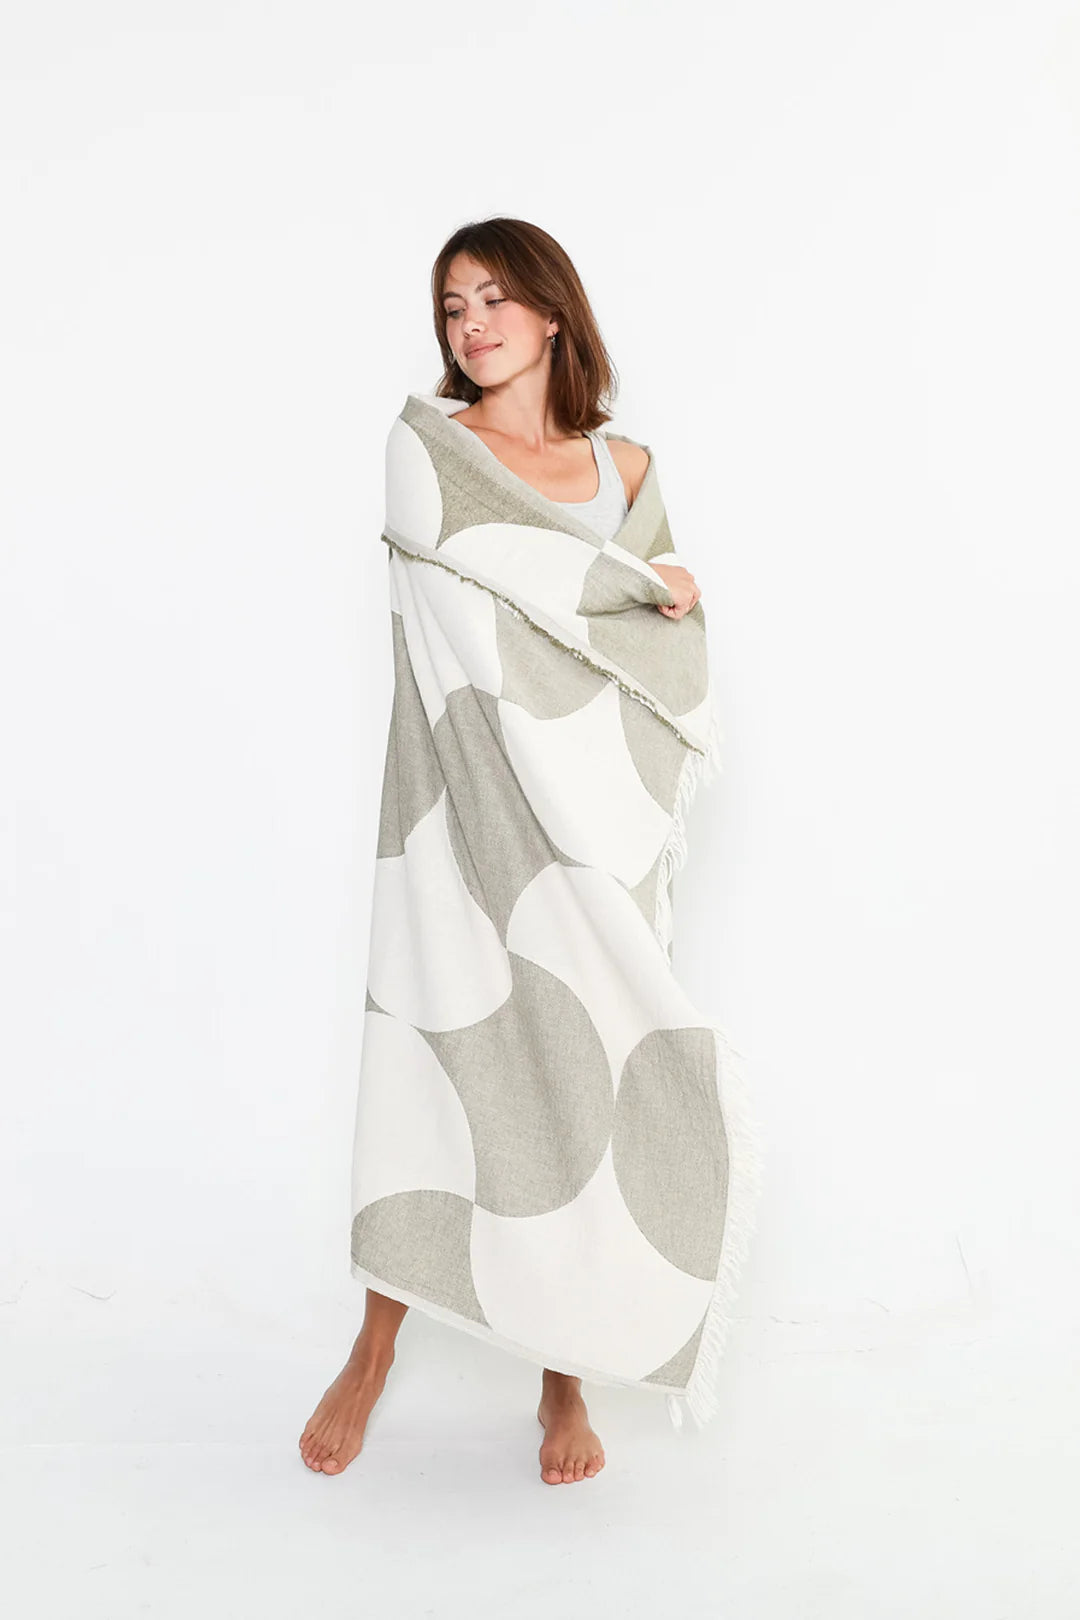 The Mod Throw - Wild and Heart